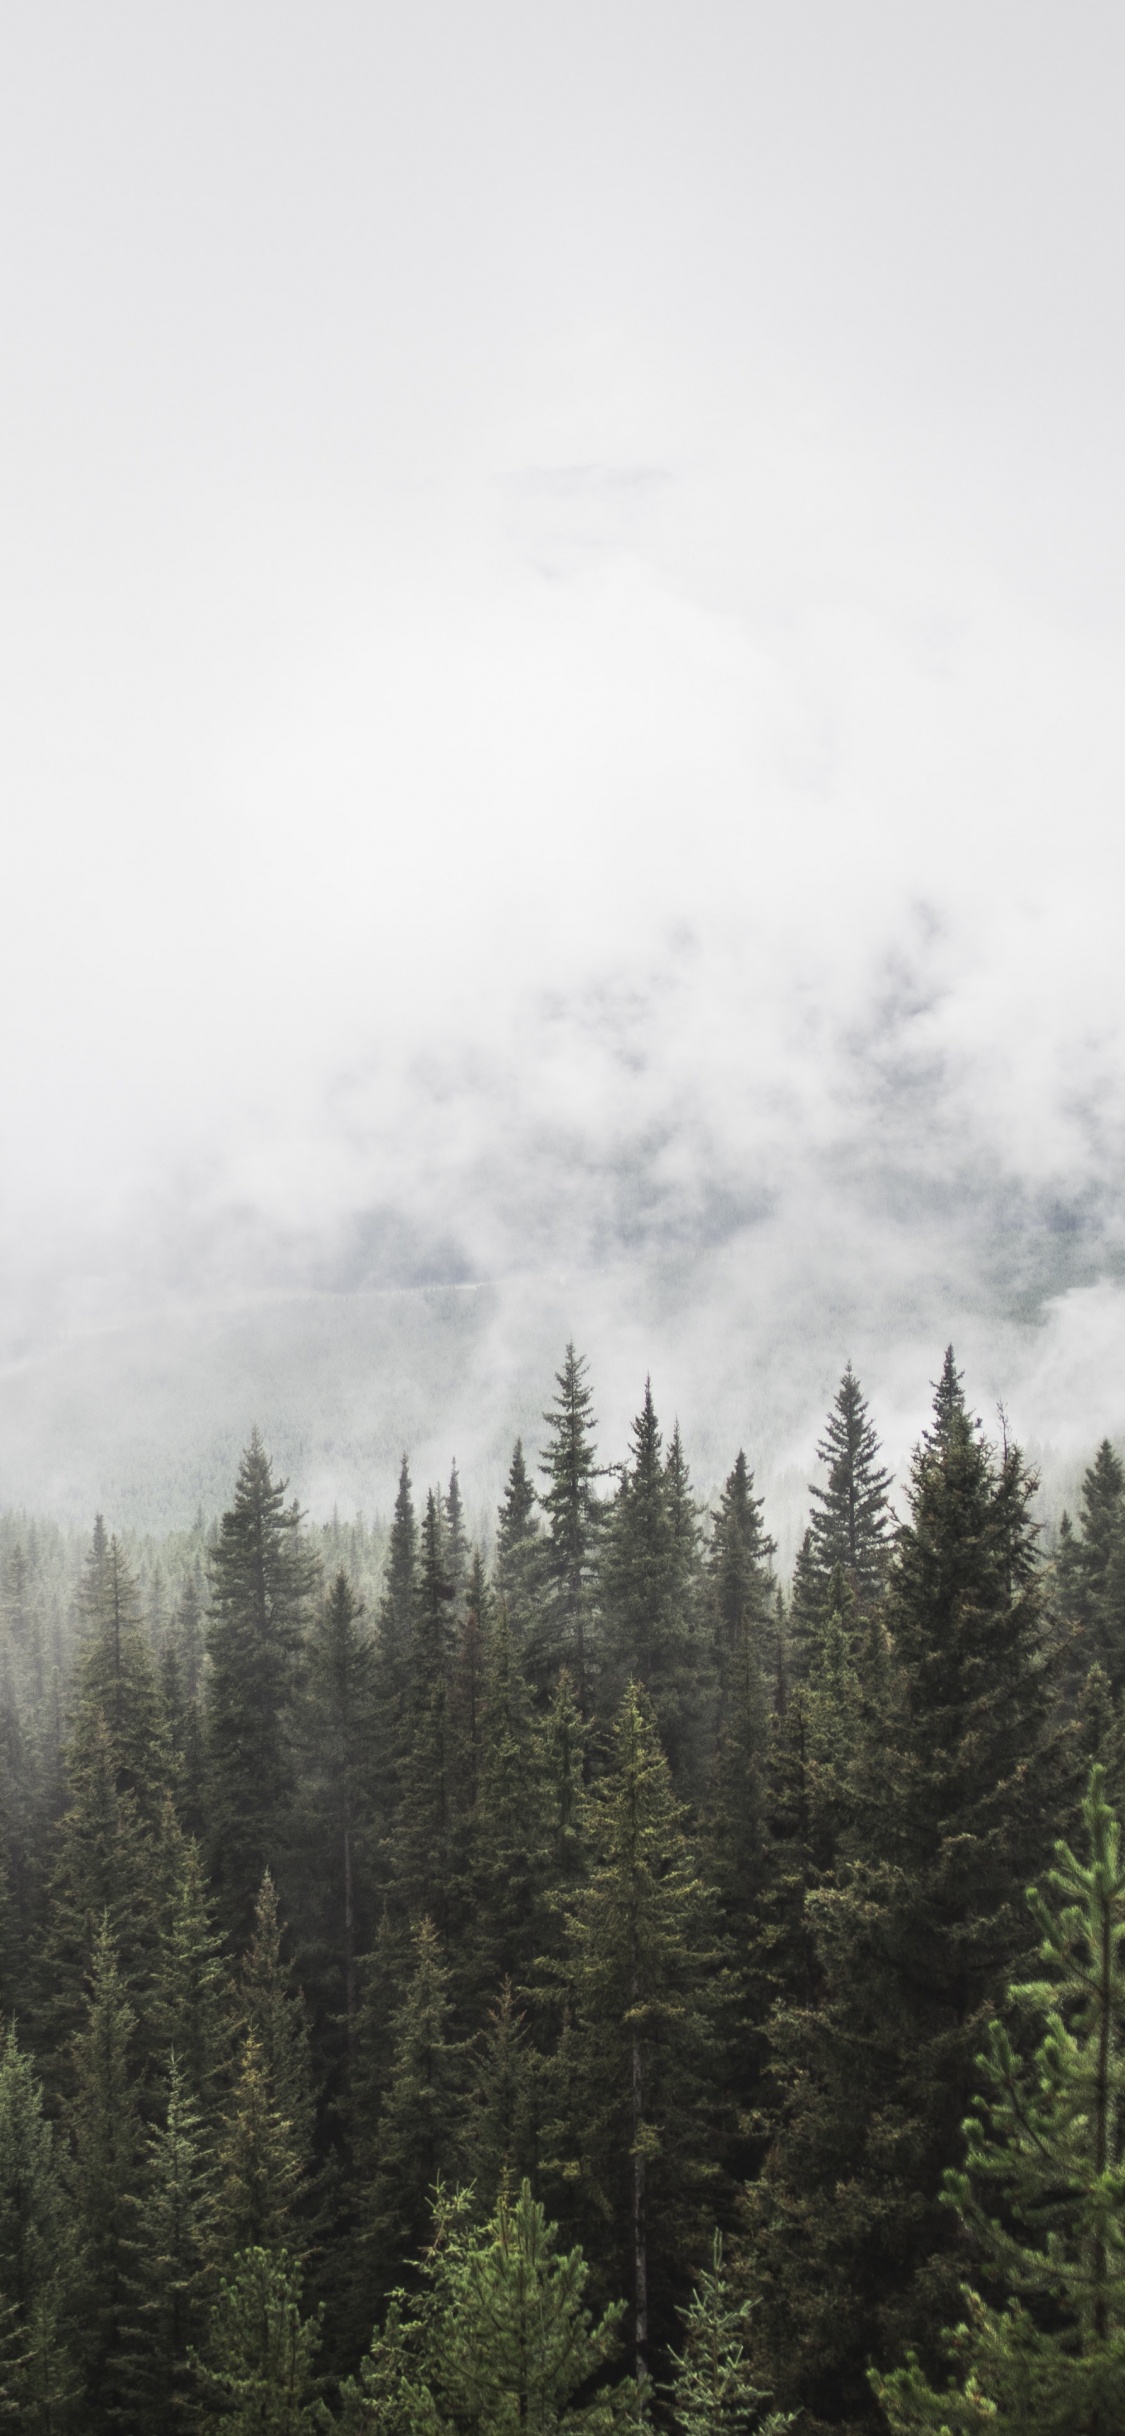 Green Pine Trees Covered With Fog. Wallpaper in 1125x2436 Resolution